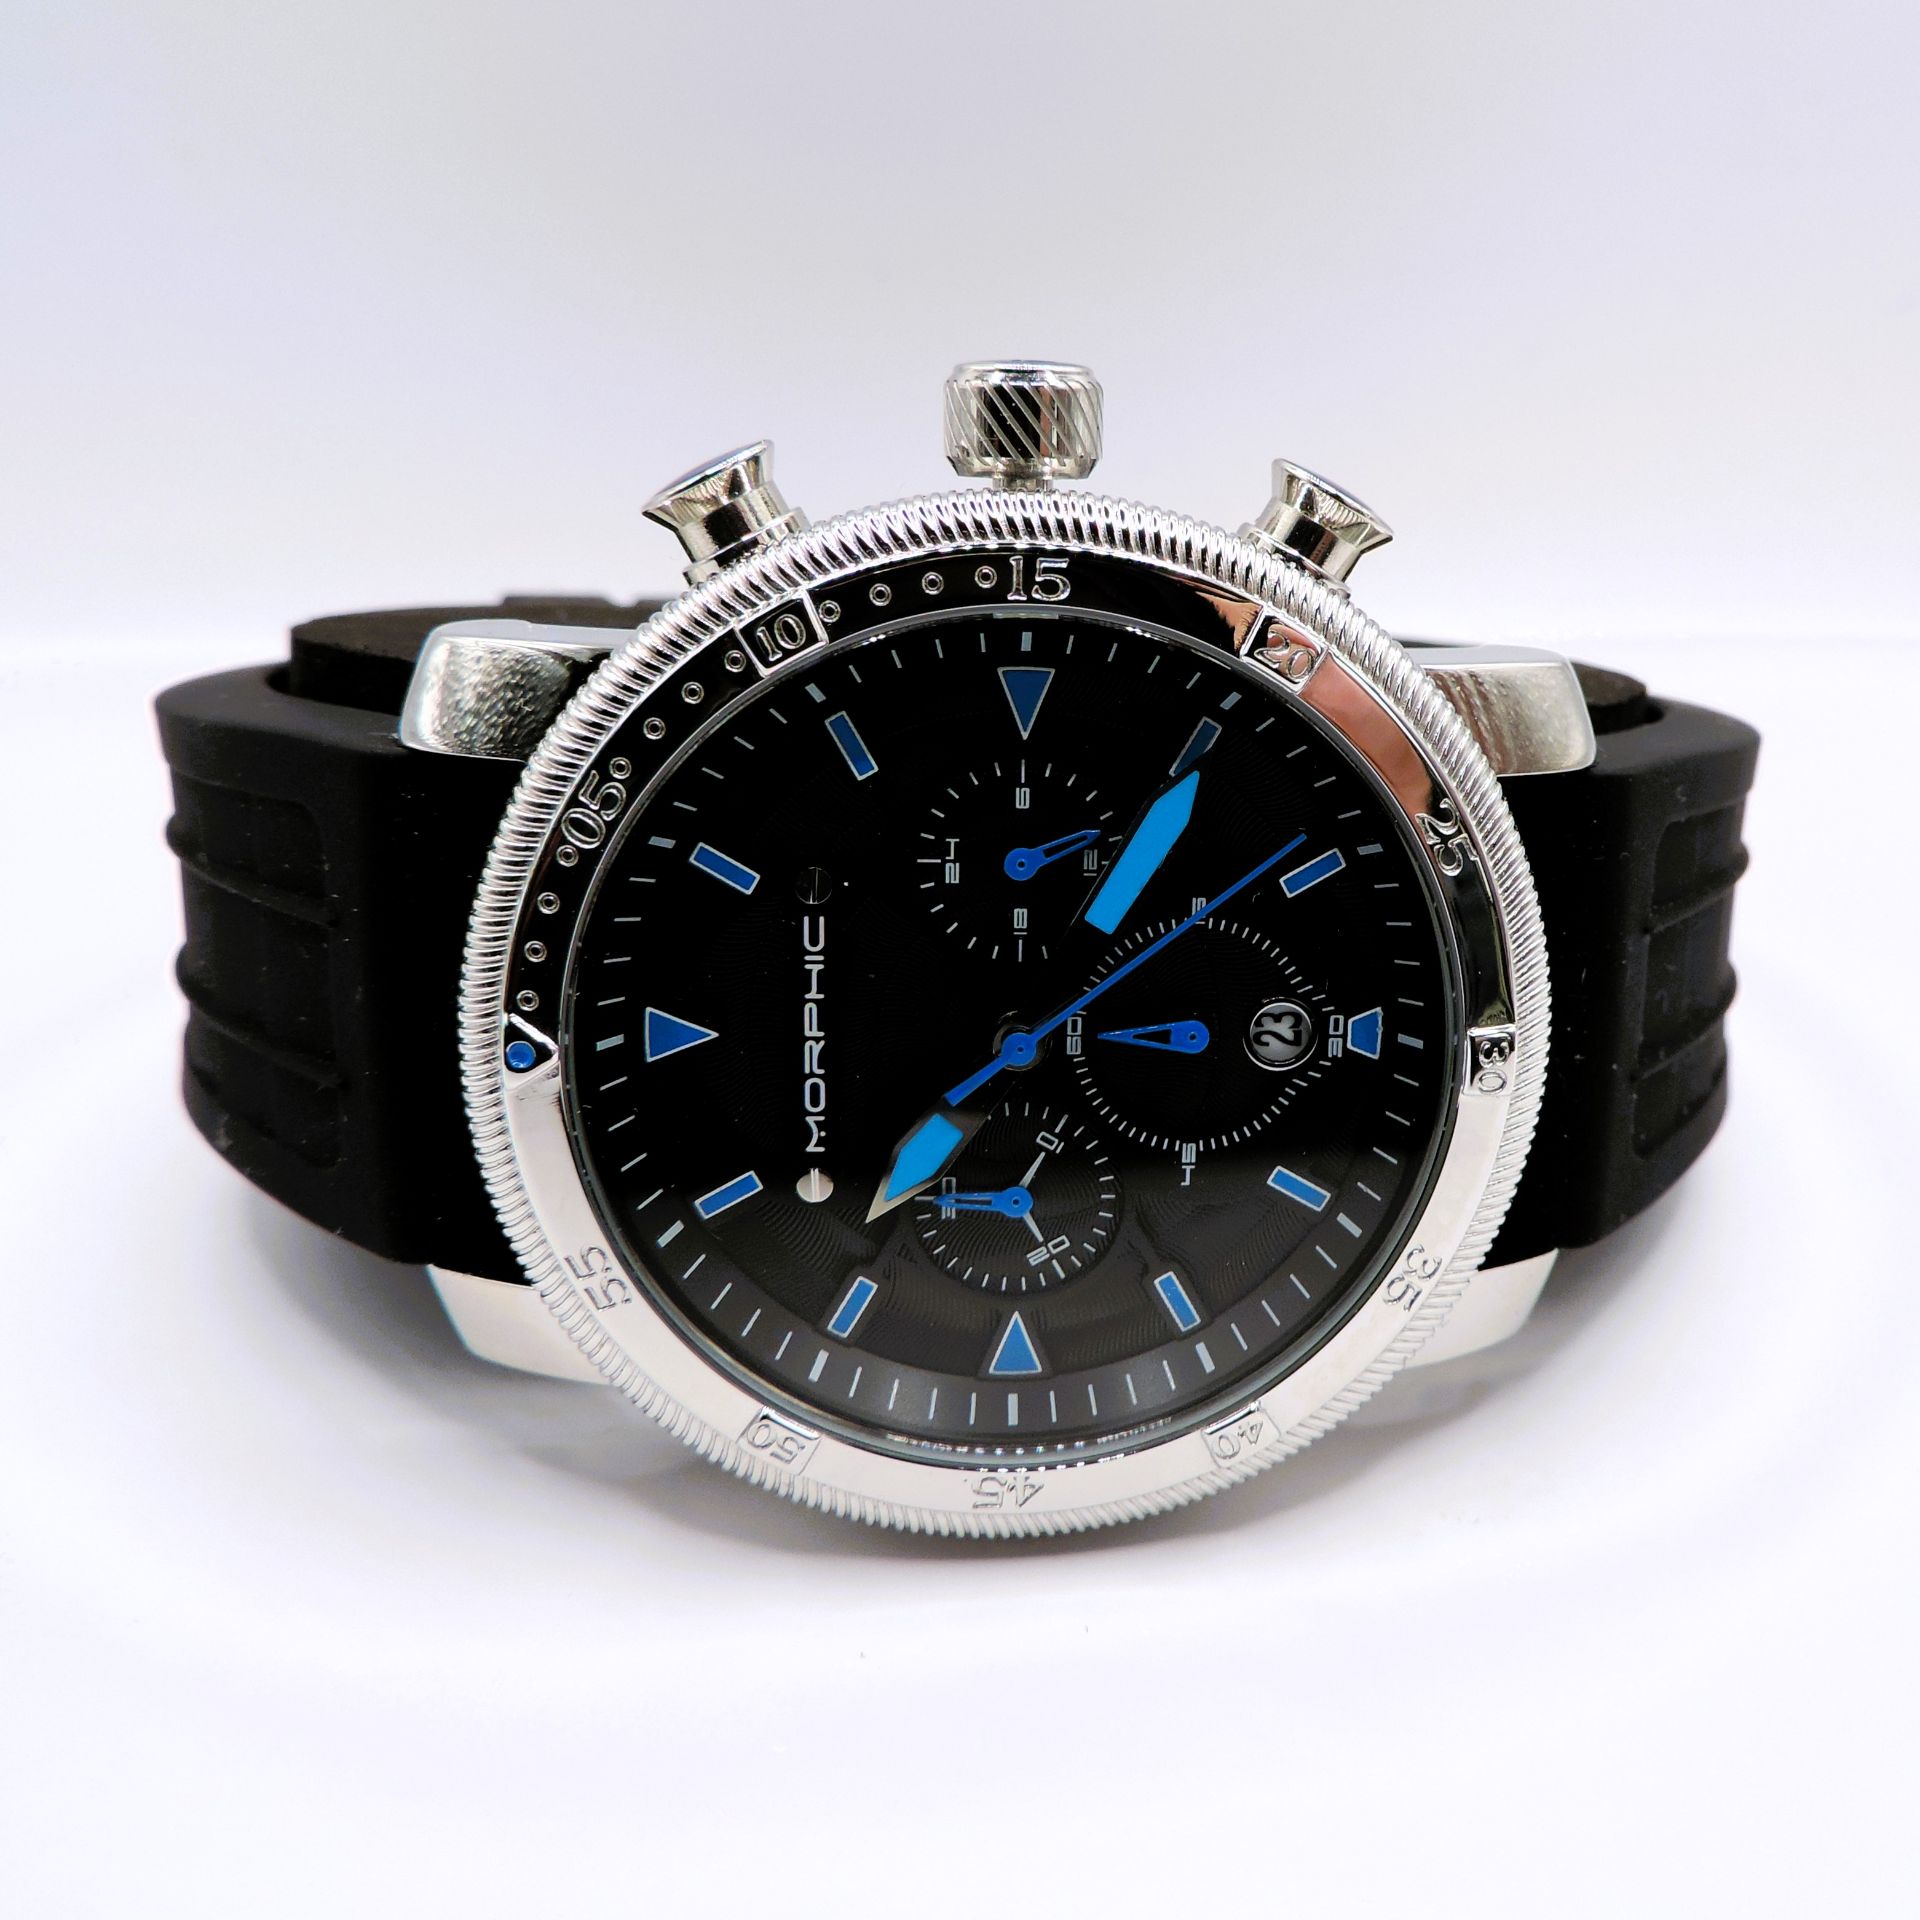 Morphic M90 Series Chronograph Watch w/Date MPH9001 New Boxed Working RRP £445.49 - Image 2 of 5